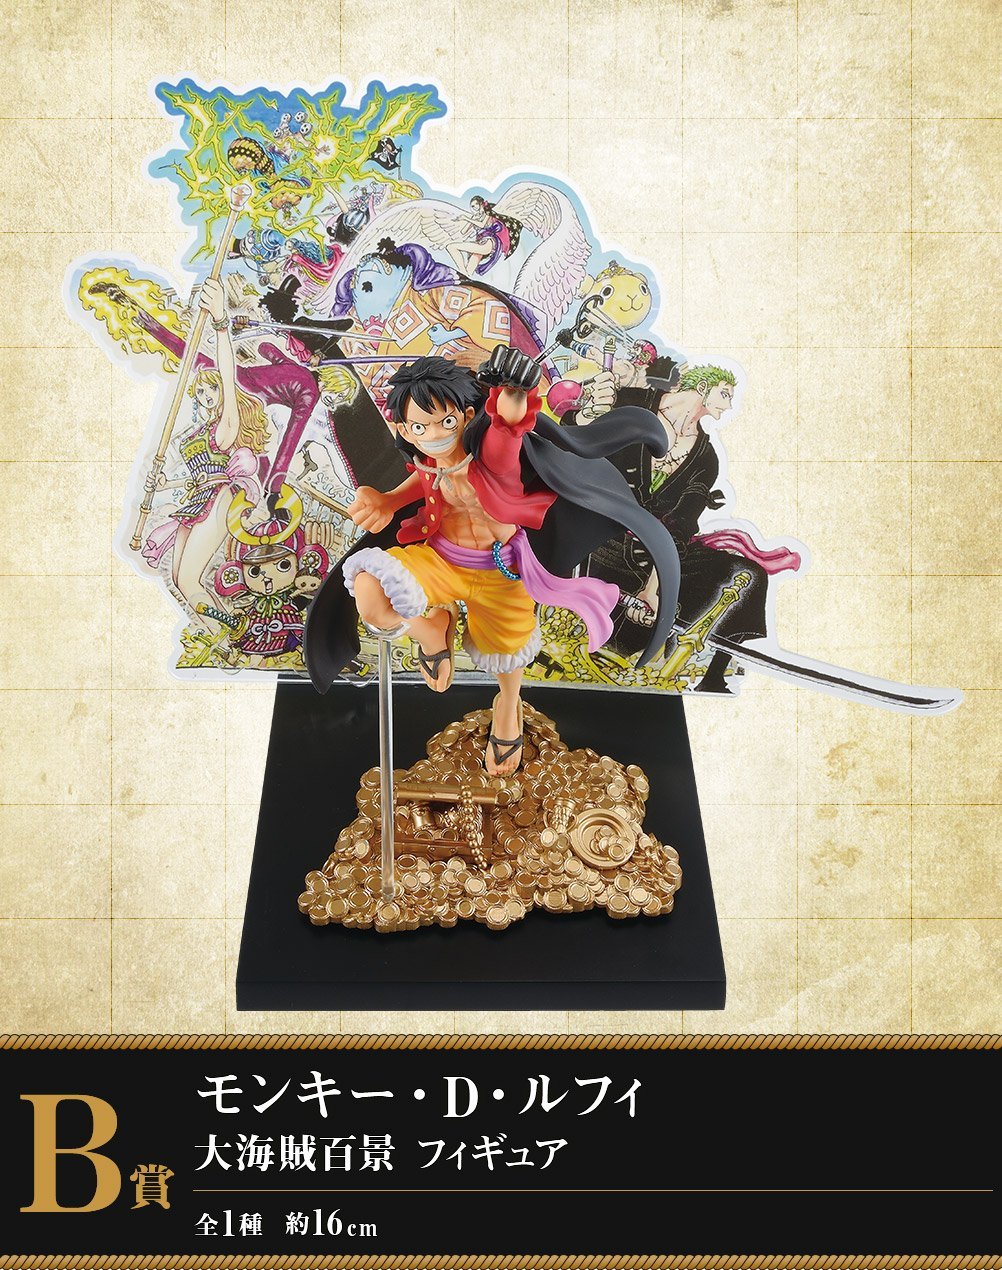 Ichiban Kuji One Piece WT100 Memorial -The 100 Views of Great Pirates Draw by Eiichiro Oda-Bandai-Ace Cards &amp; Collectibles